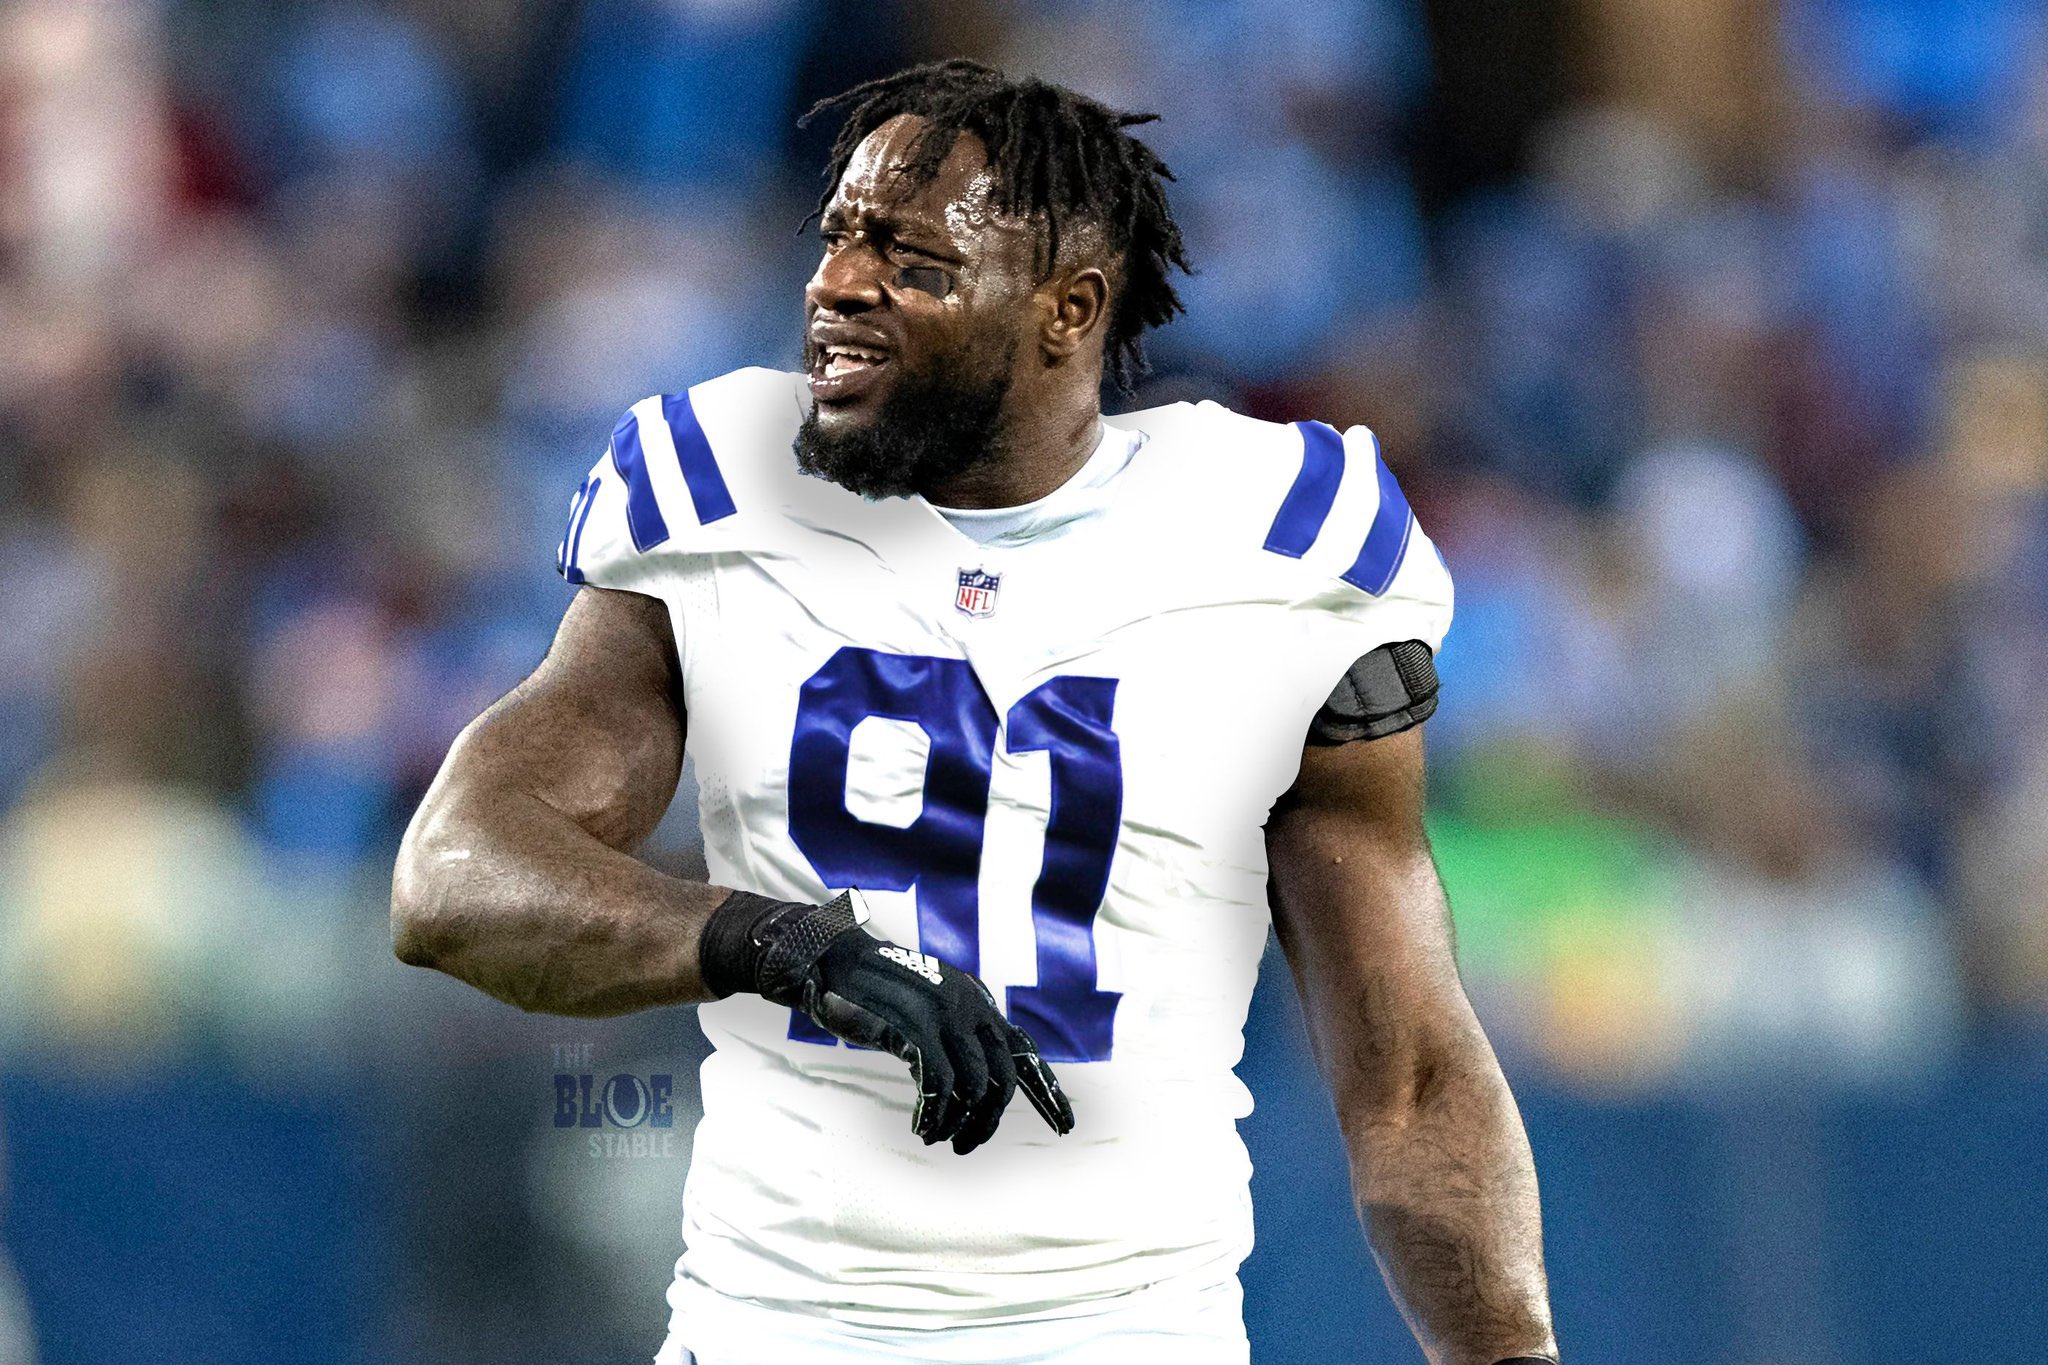 How Good Can the Colts Pass Rush be With Ngakoue?